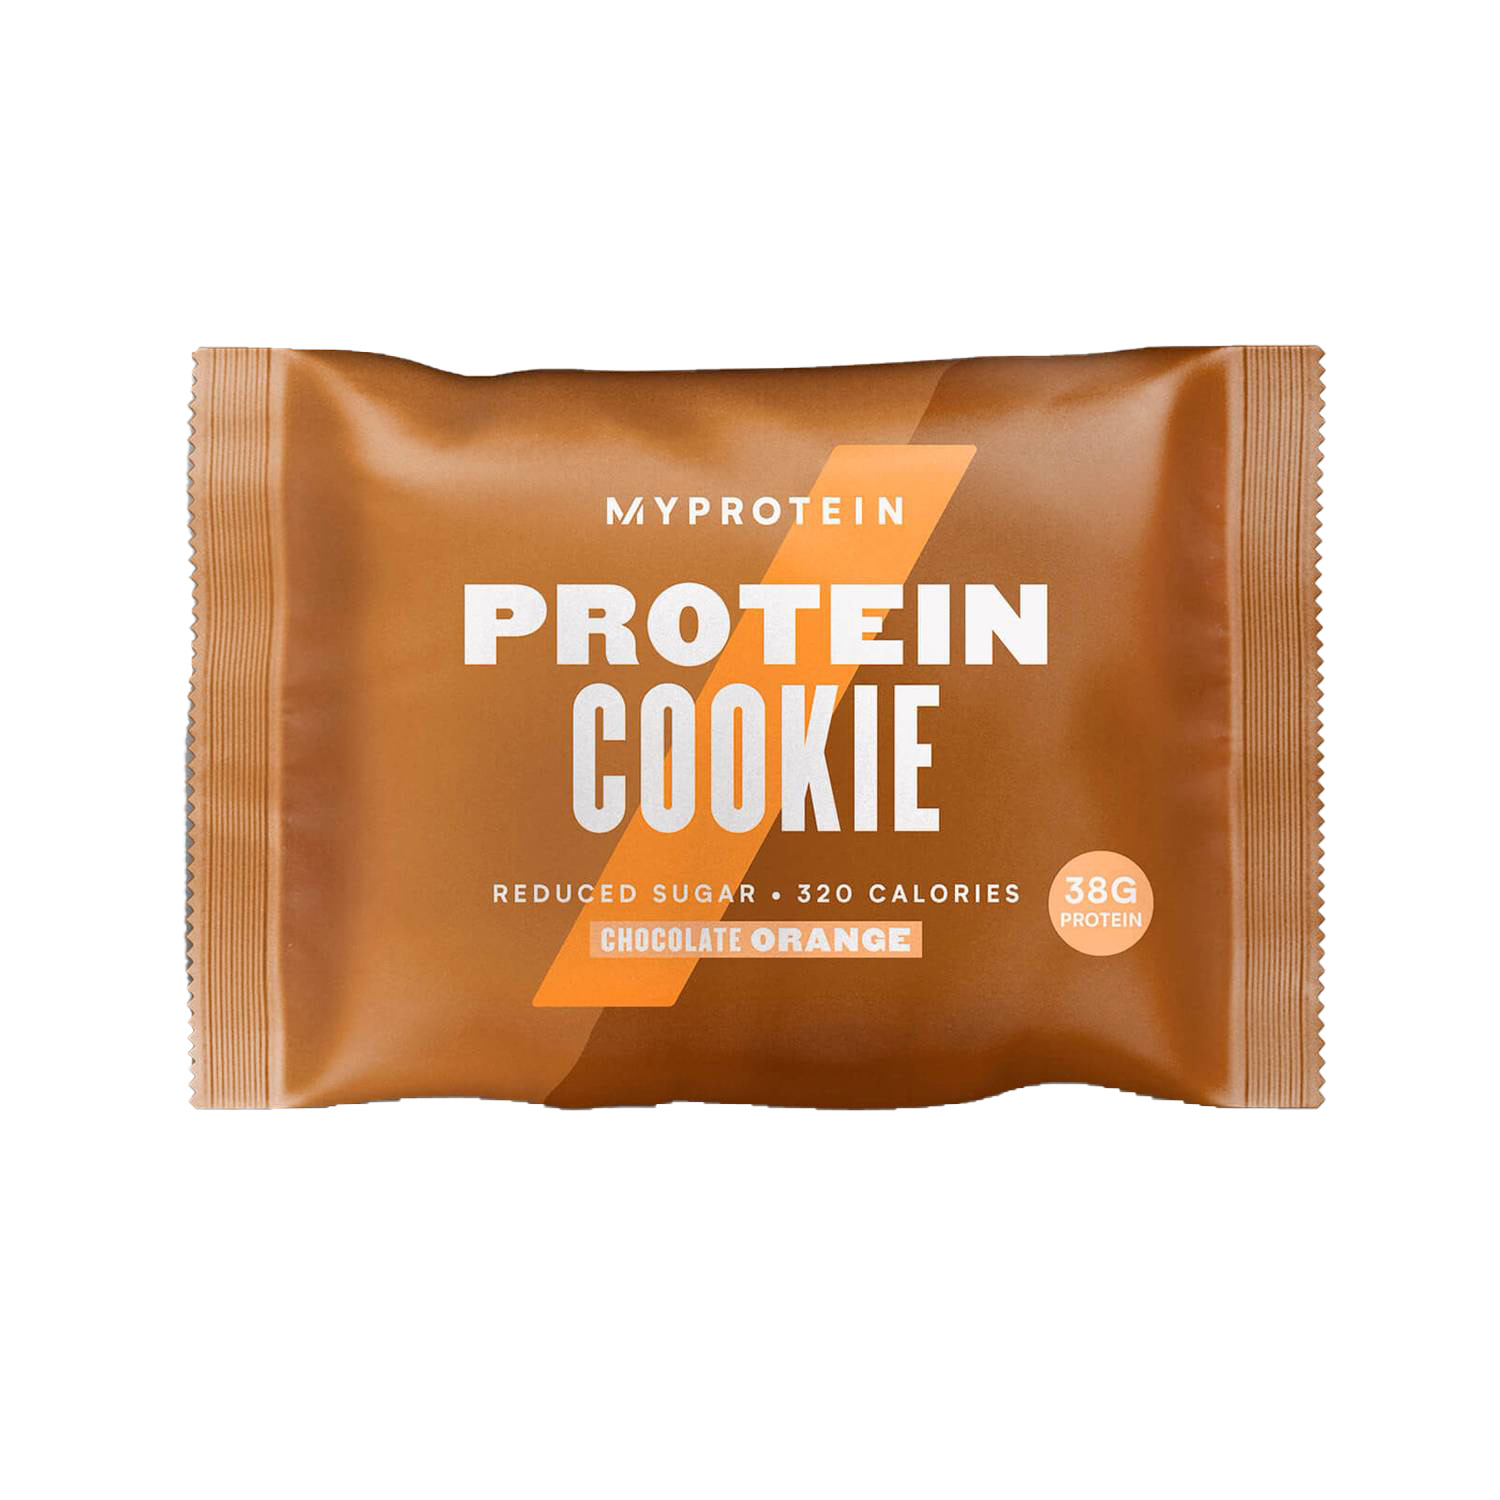 Protein Cookie